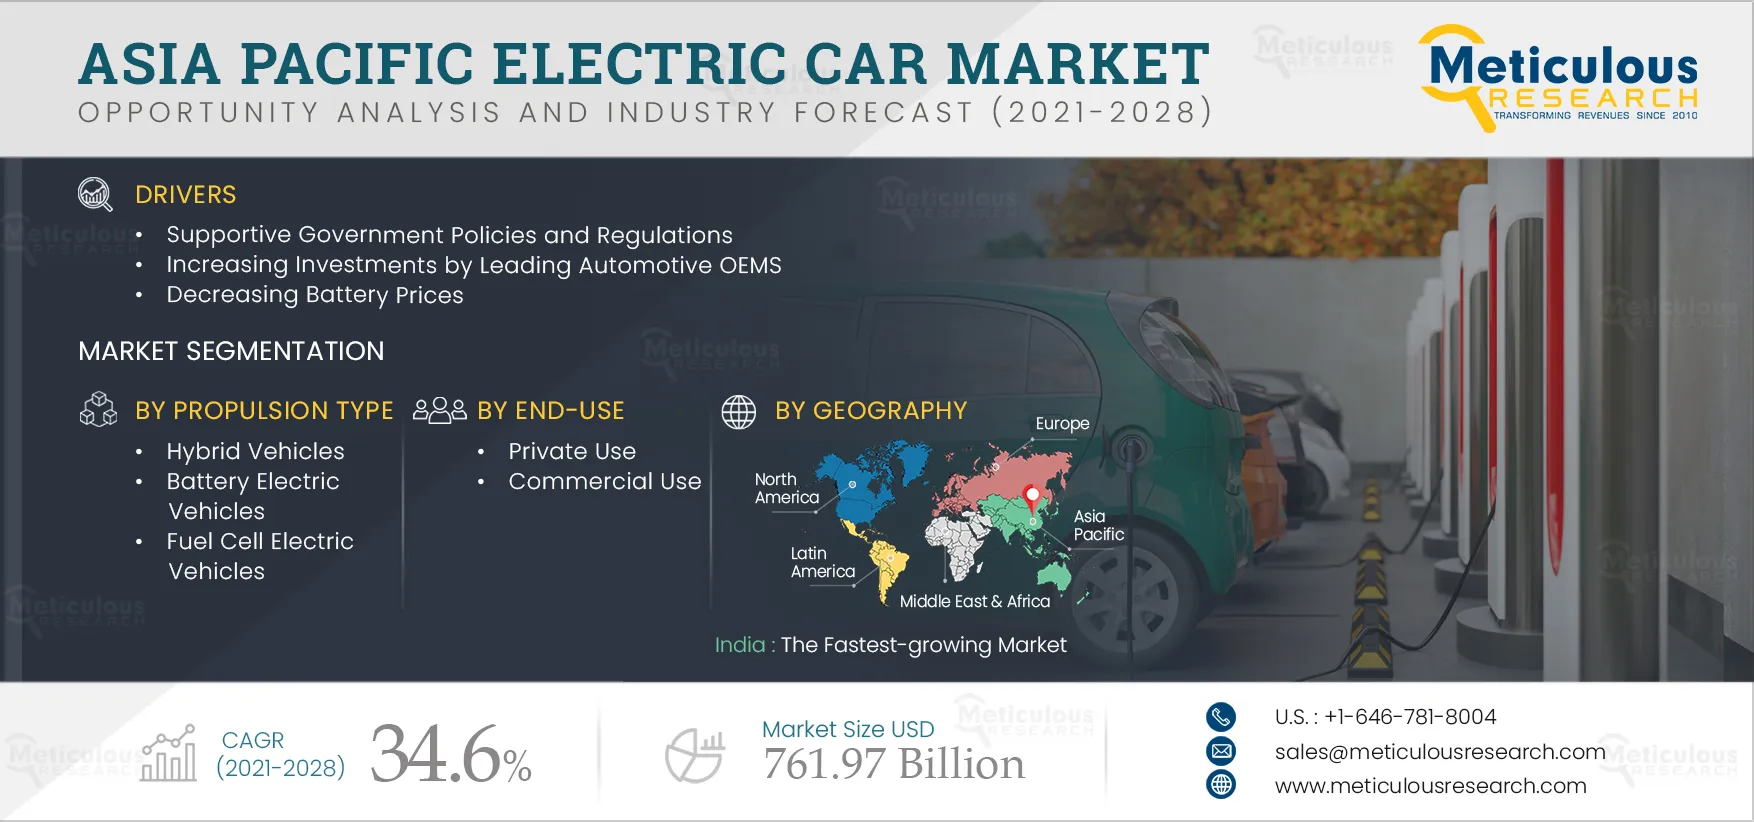 Asia-Pacific Electric Car Market